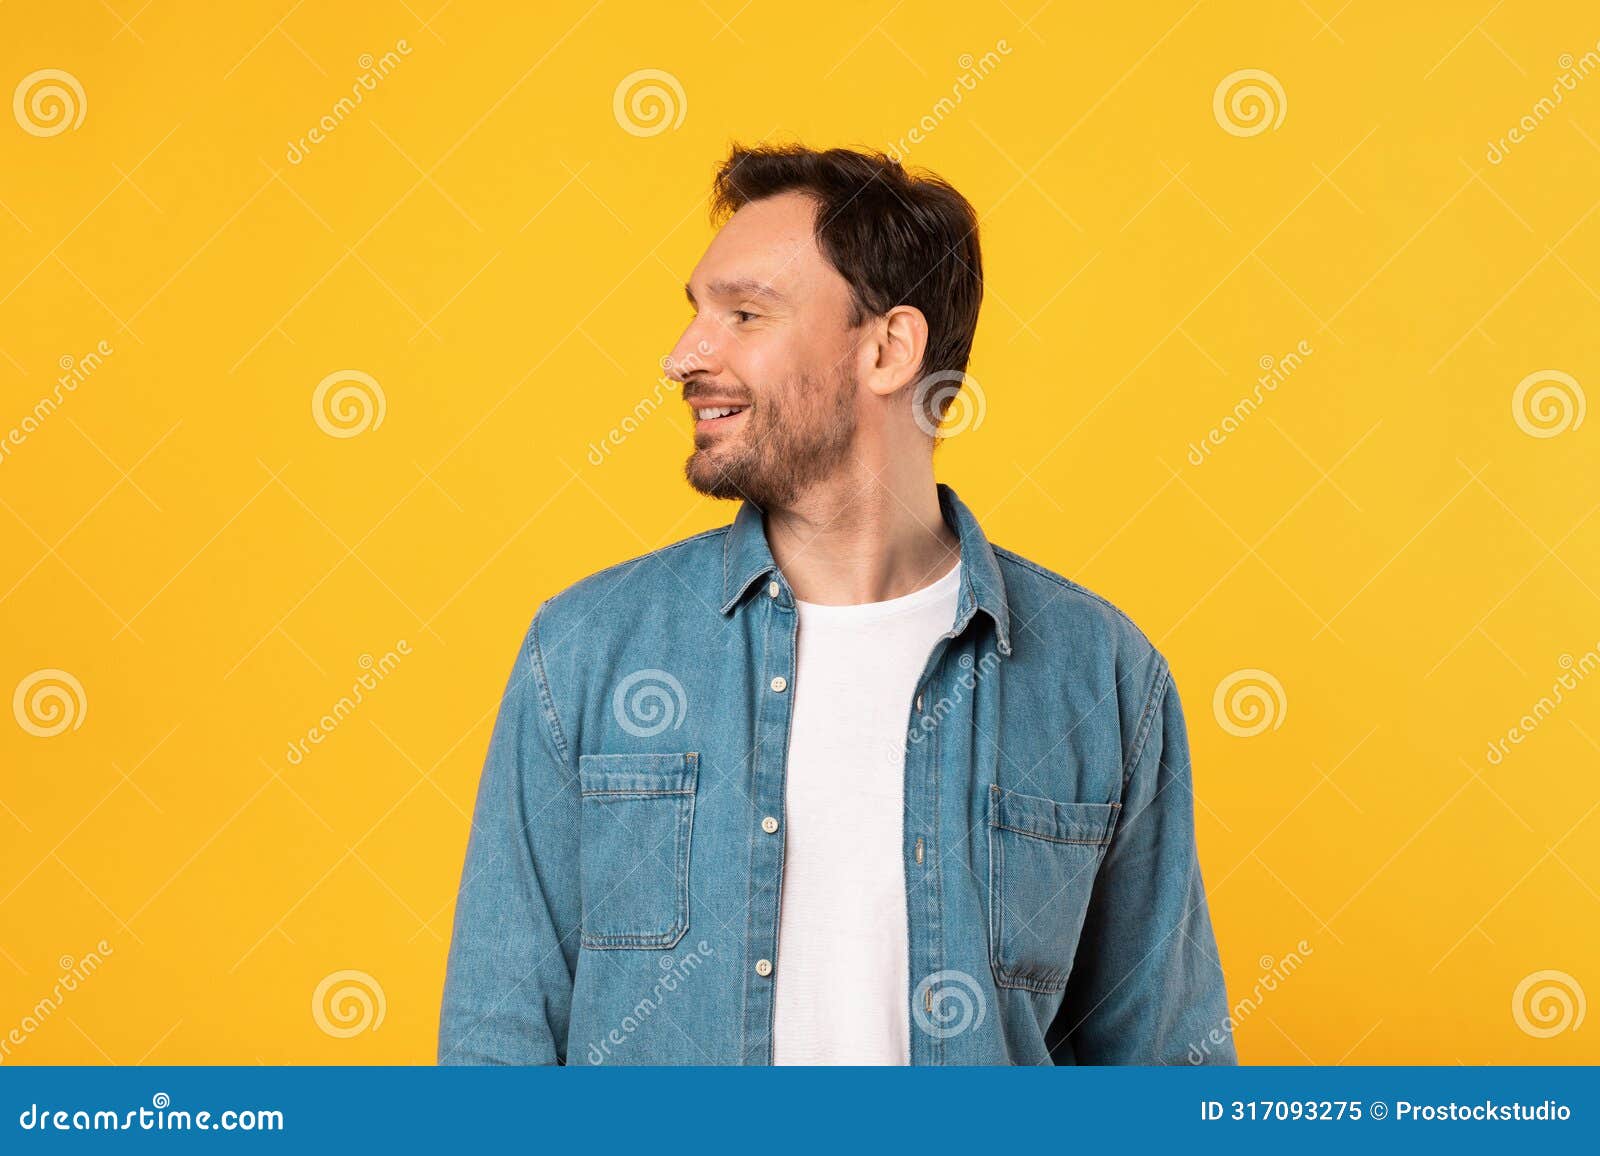 man standing in front of yellow background, looking aside